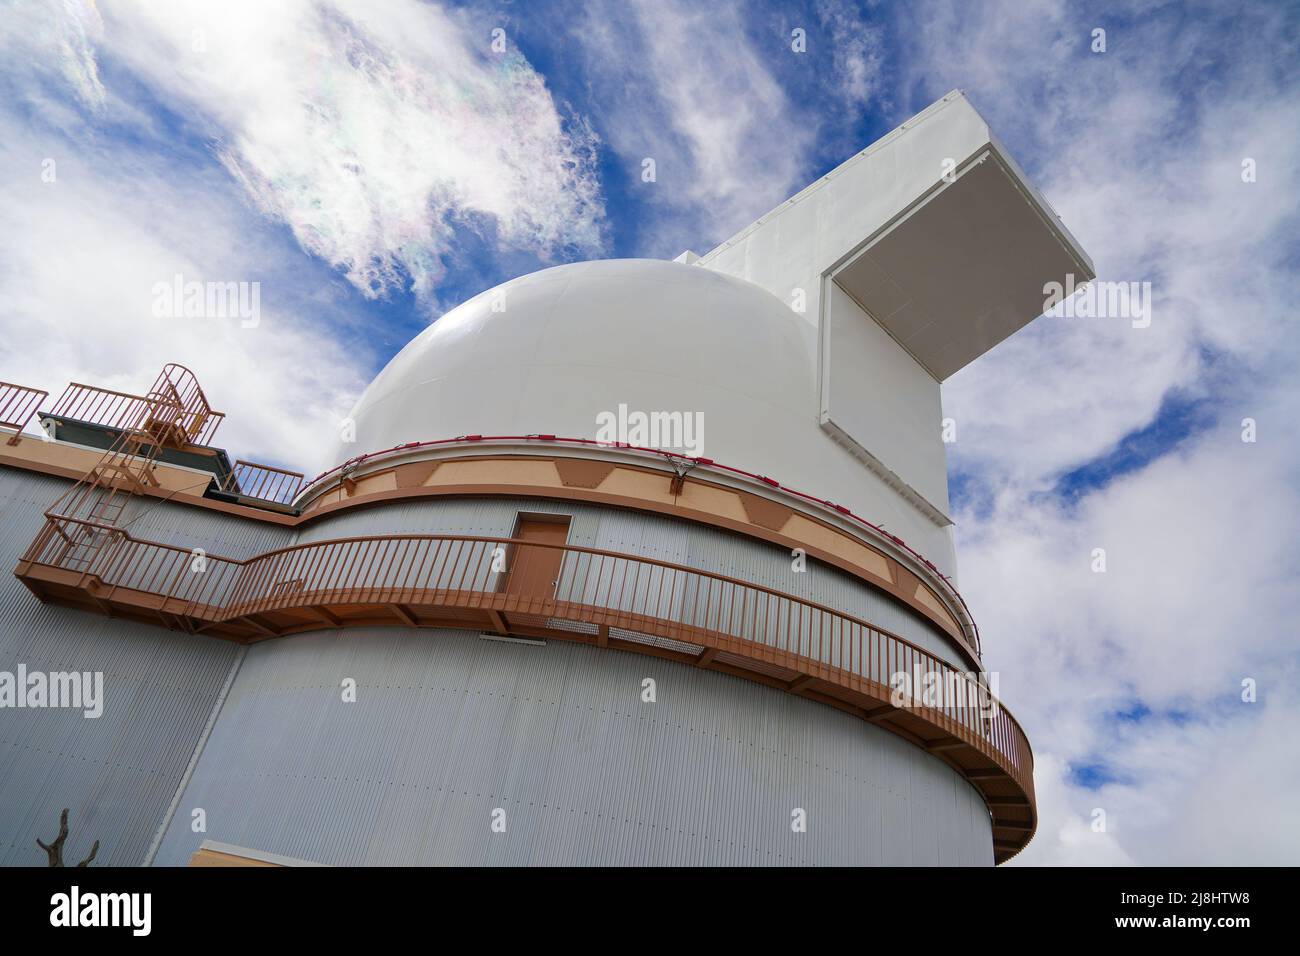 Low angle view of the University of Hawaii 2.2-meter telescope at the summit of the Mauna Kea volcano on the Big Island of Hawaii, United States Stock Photo